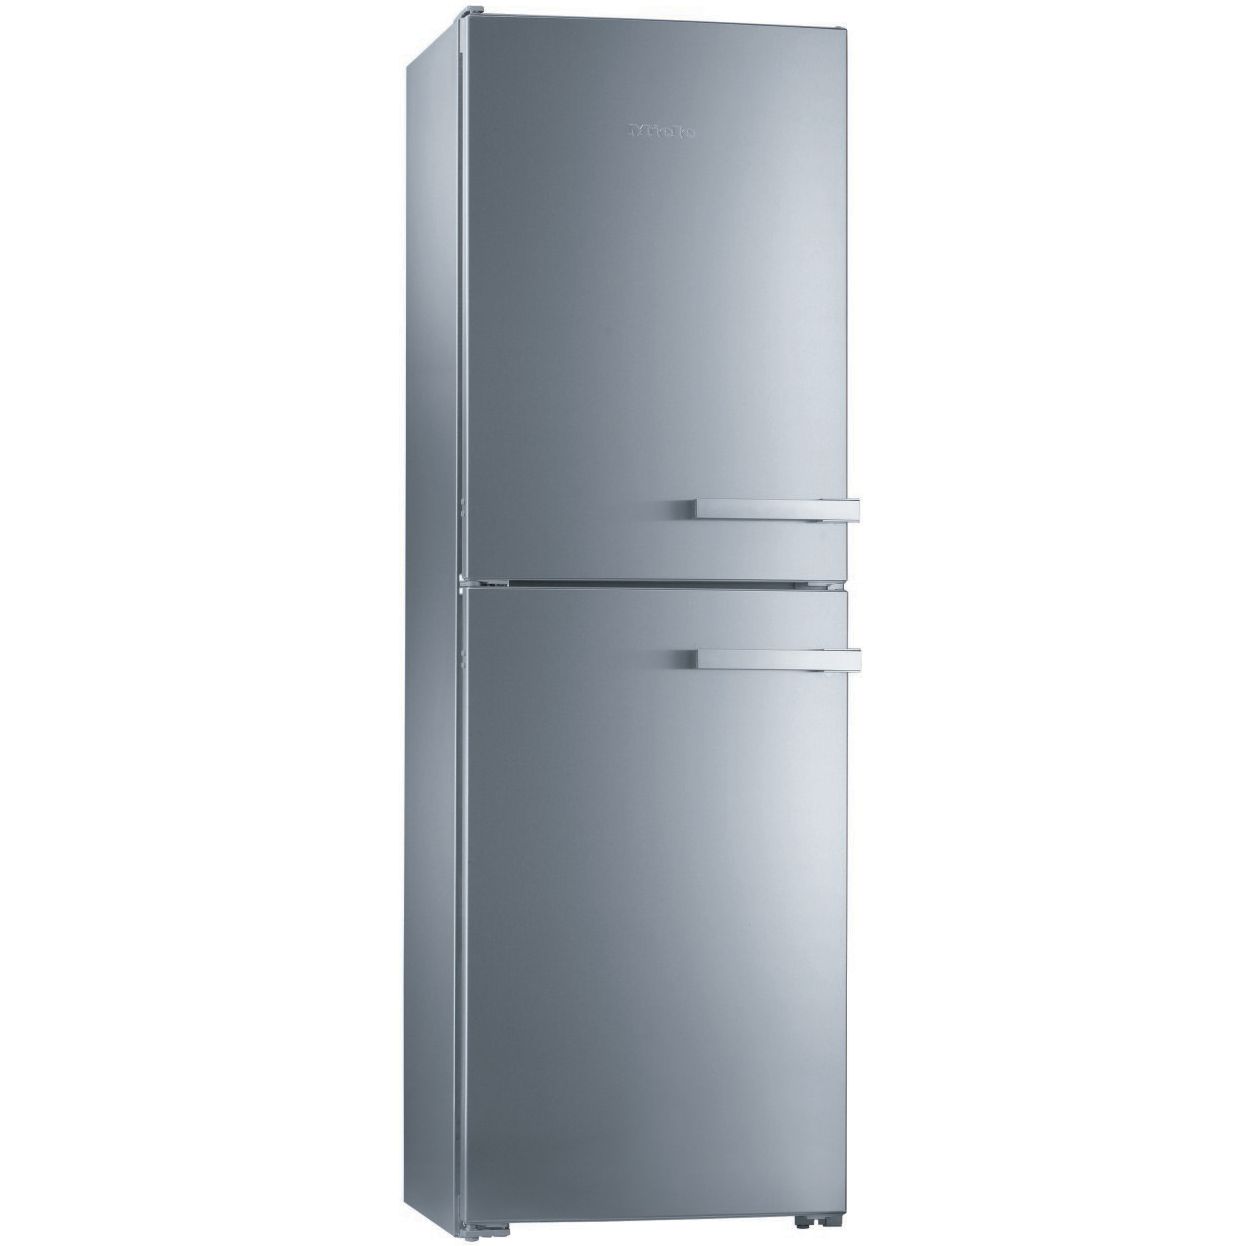 Miele KWTN14826SDEed Wine Cooler and Freezer, Stainless Steel at John Lewis